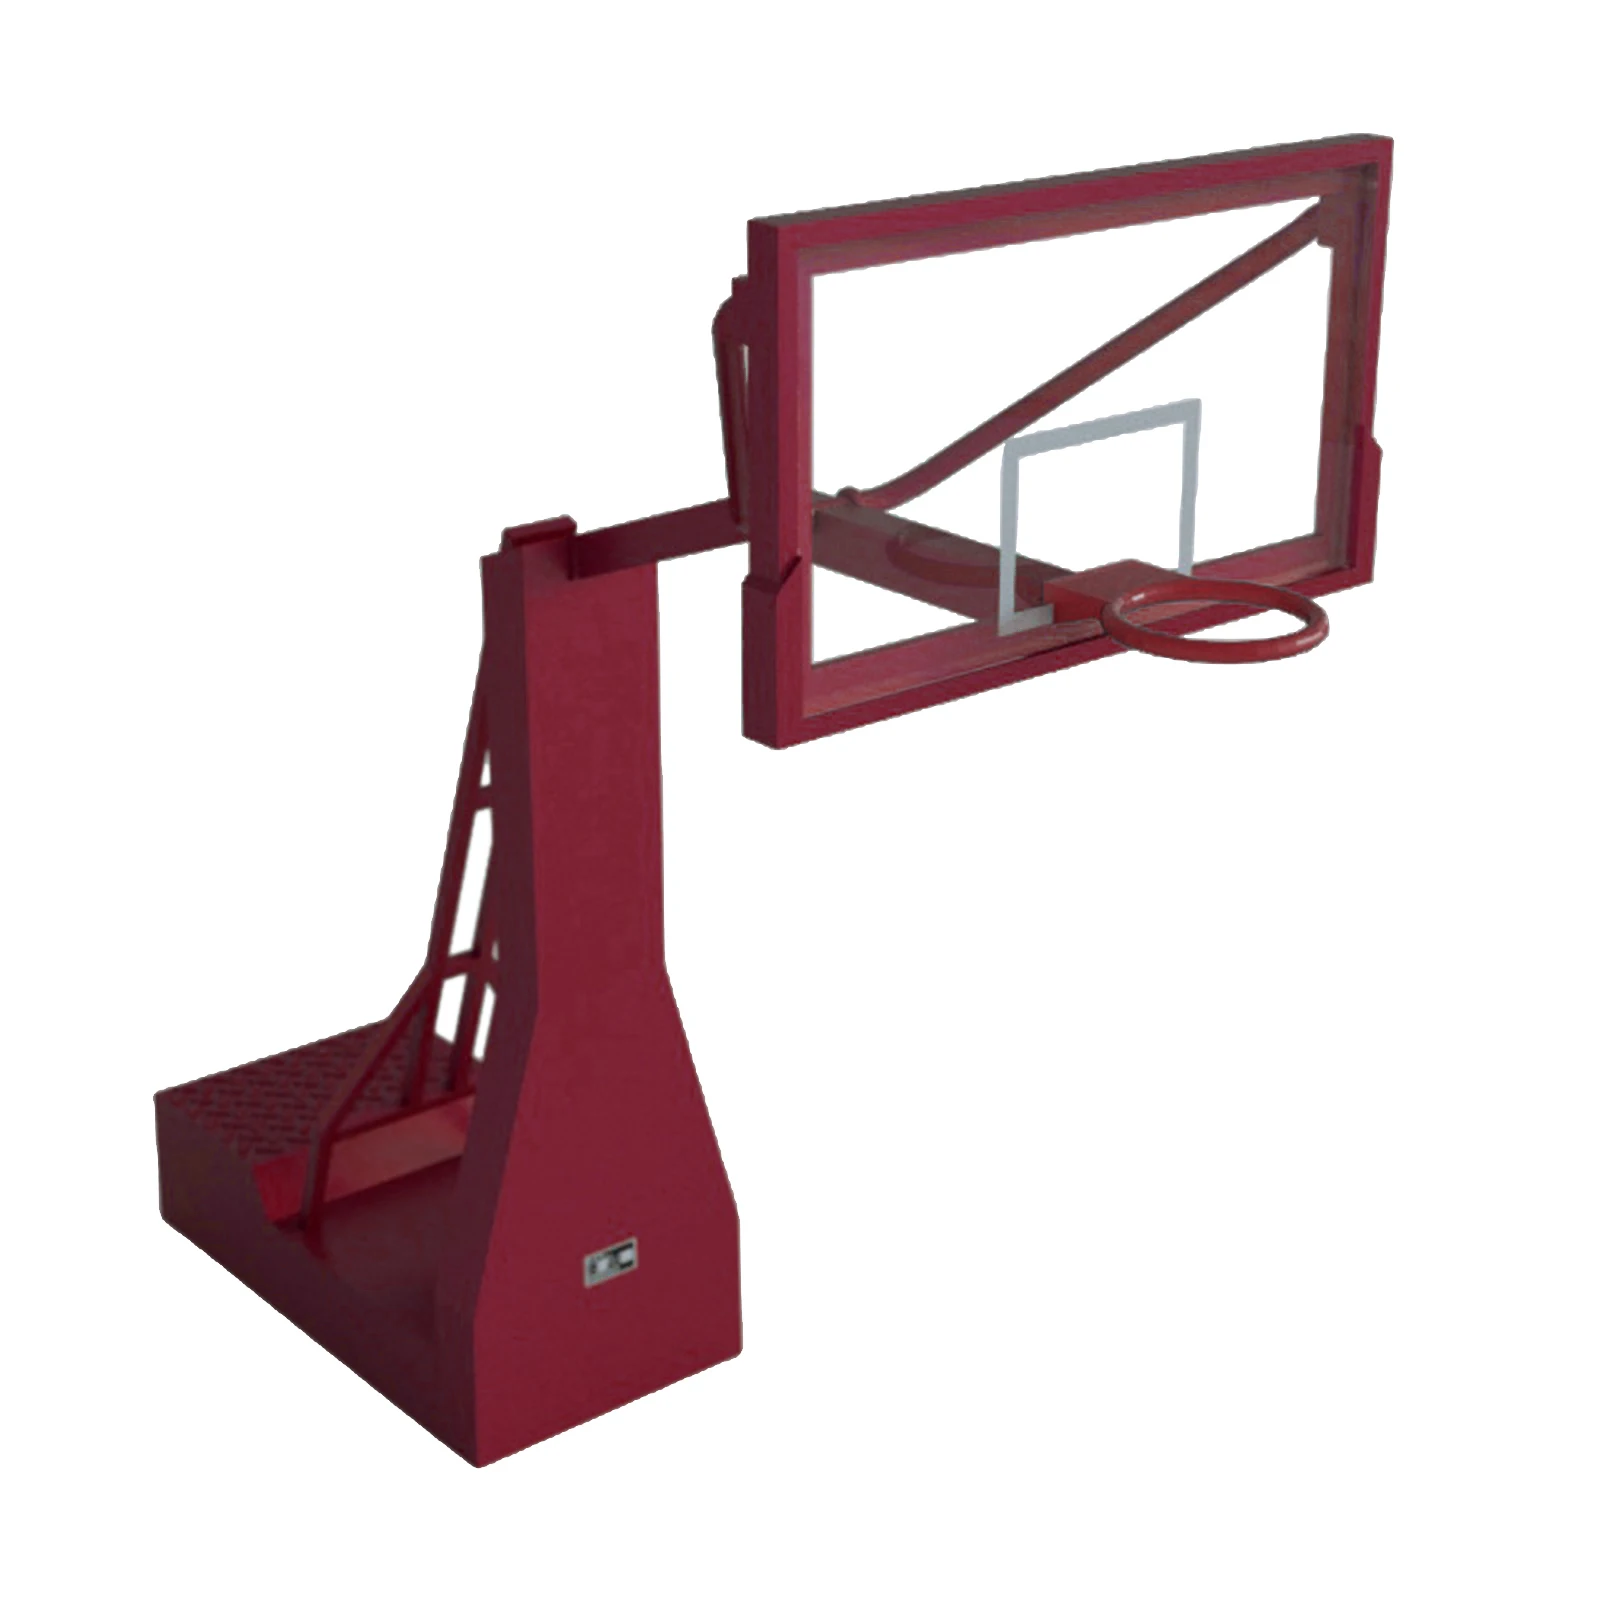 1:32 Scale Simulation Basketball Hoop Toys Model for Action Figures Life Scene Props Decor Collection